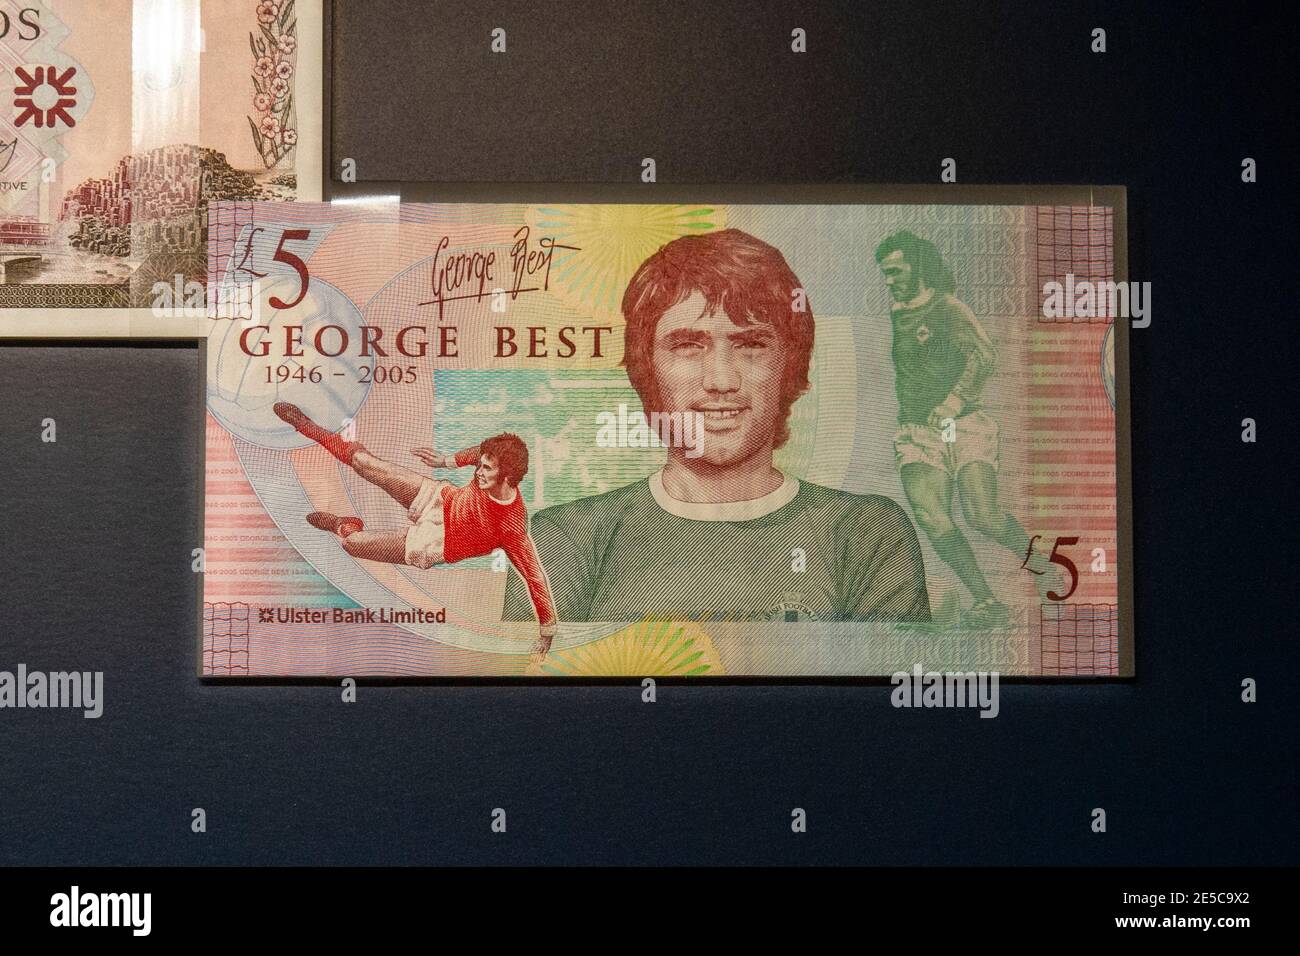 Ulster Bank Ltd five pound notes commemorating the football legend George Best, the Money Gallery, Ashmolean Museum, Oxford, UK. Stock Photo